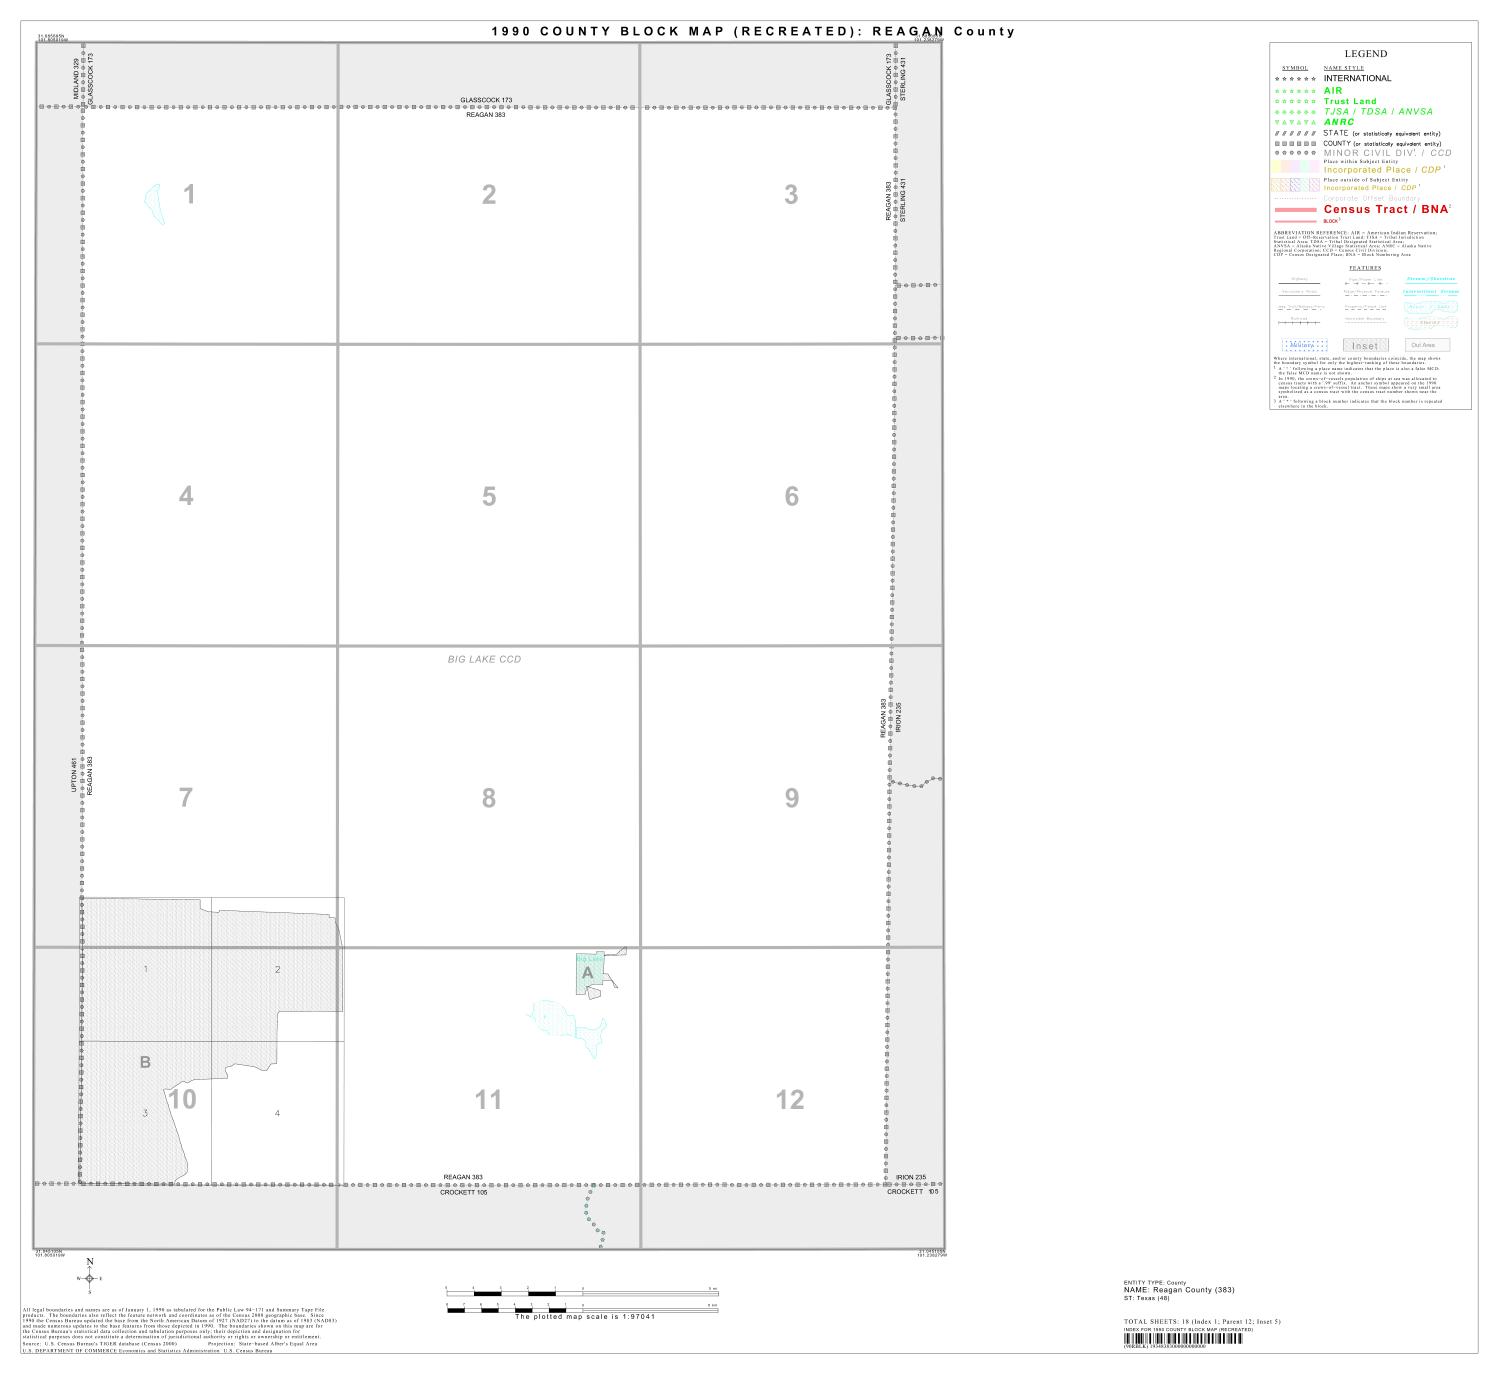 1990 Census County Block Map (Recreated): Reagan County, Index
                                                
                                                    [Sequence #]: 1 of 1
                                                